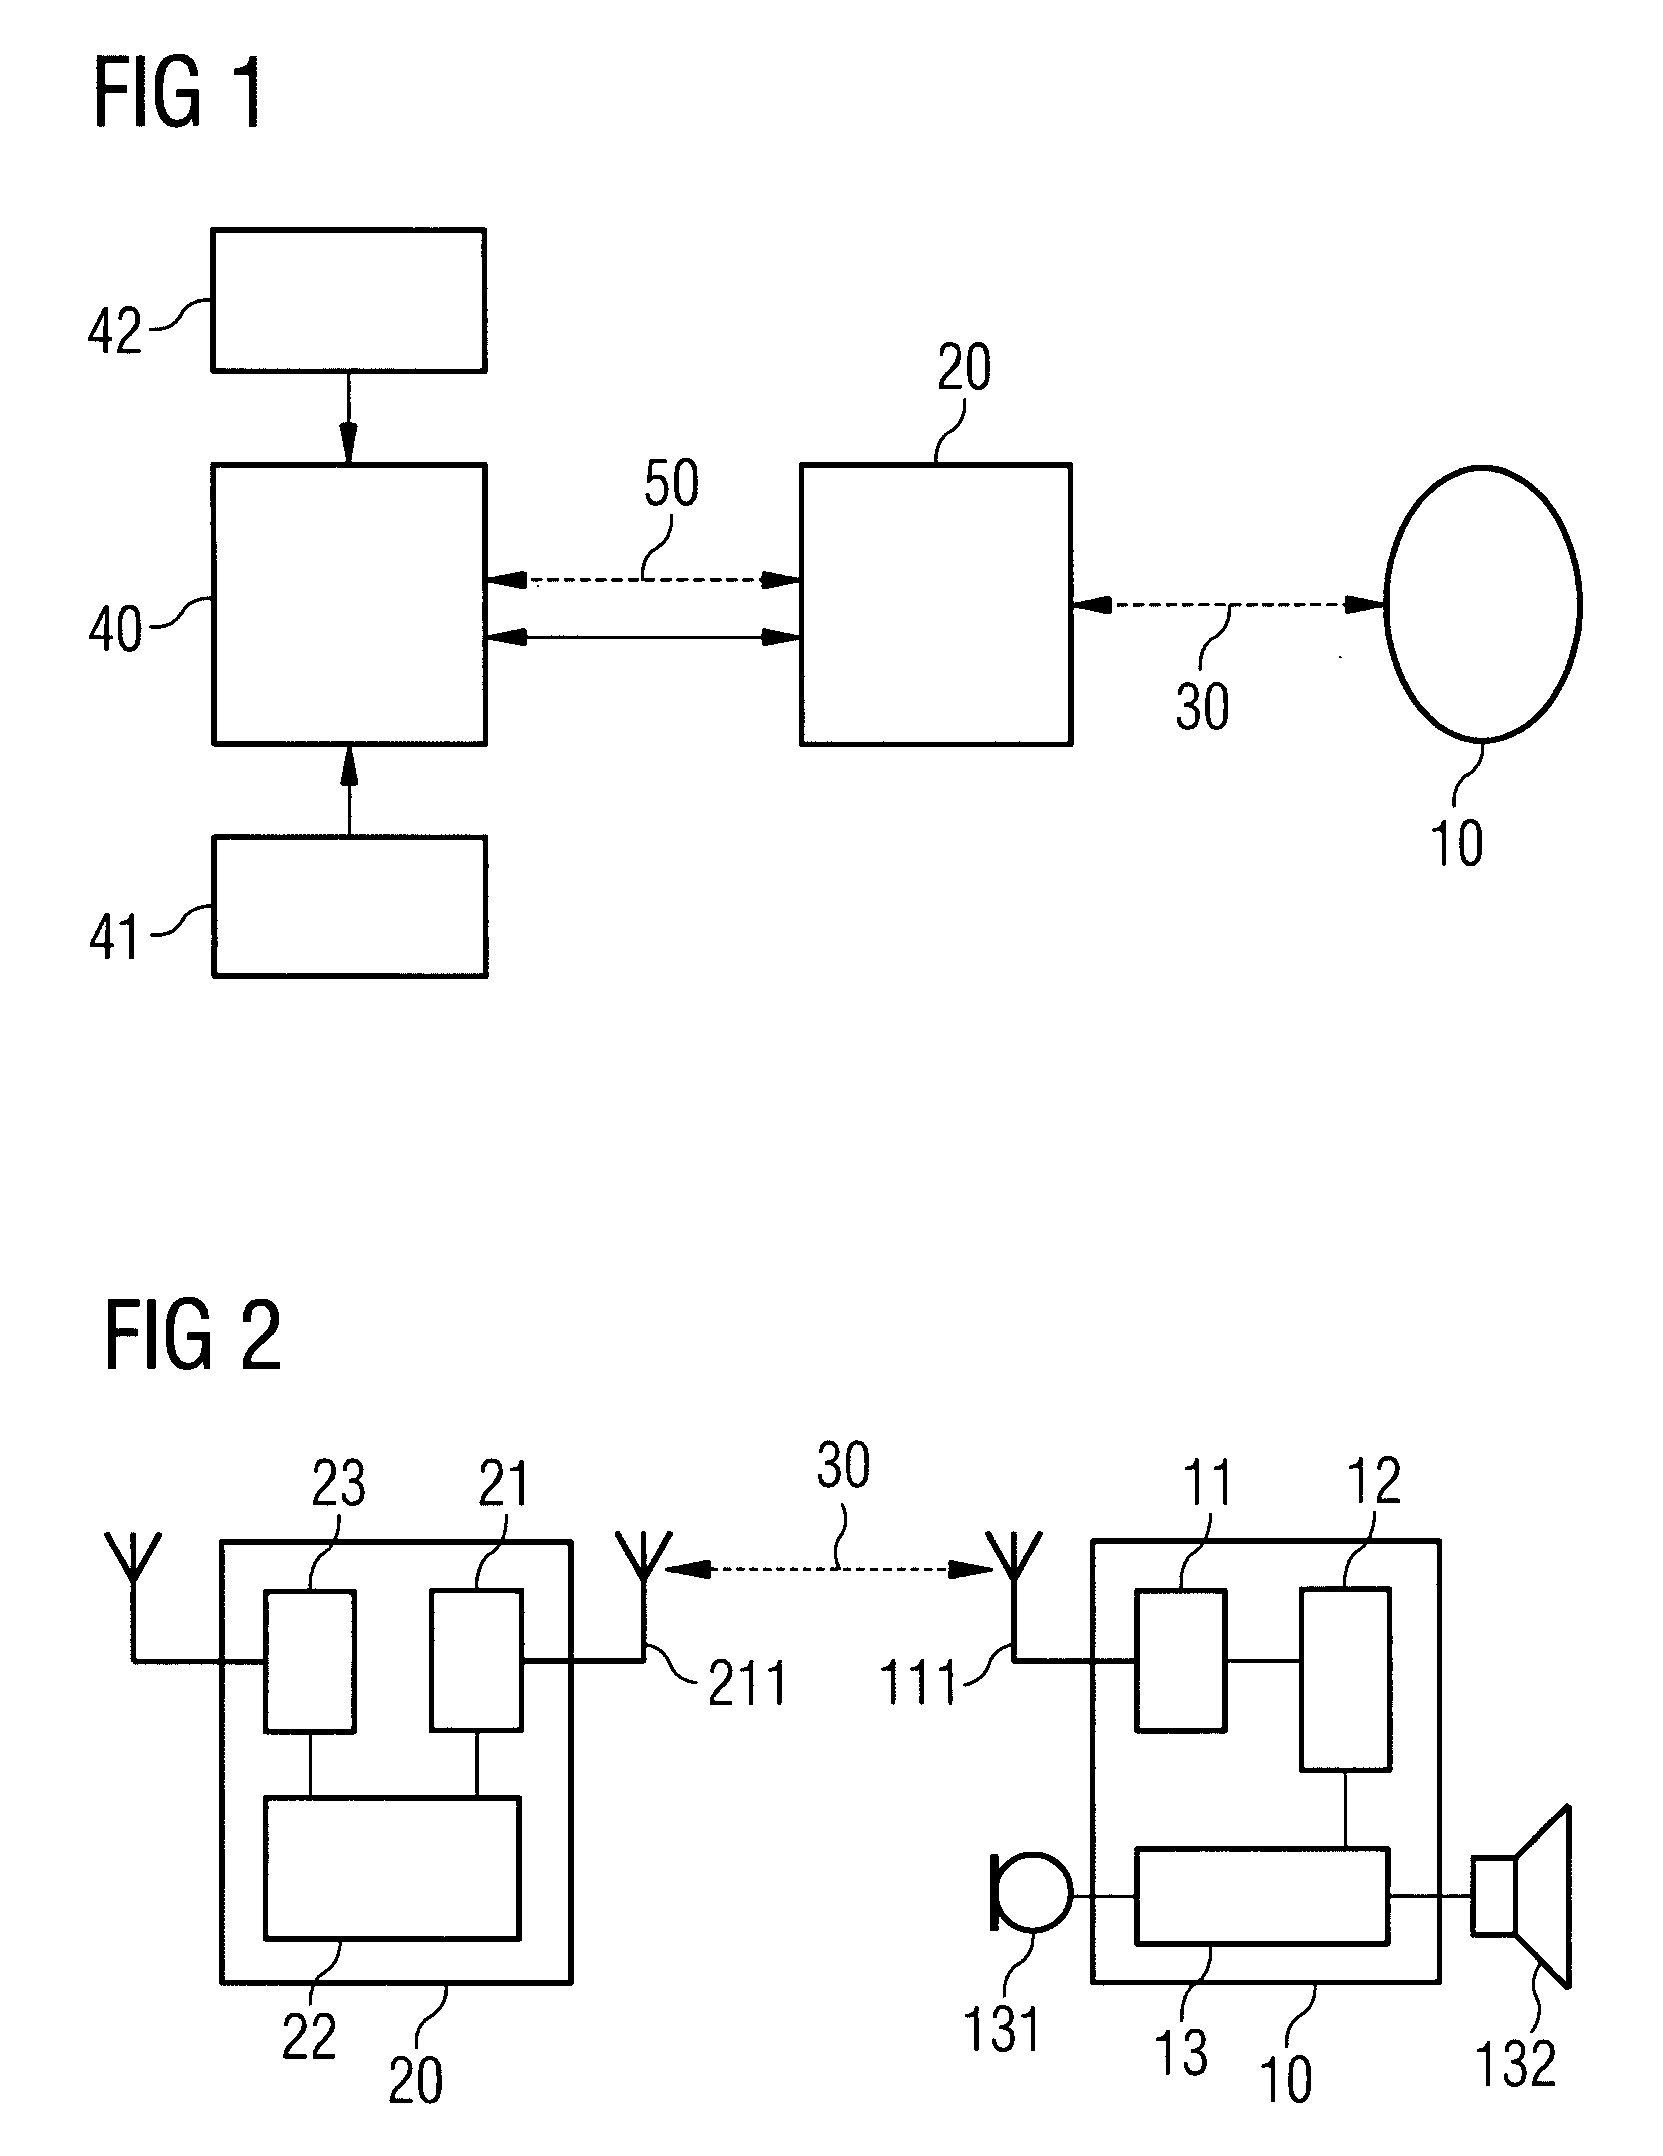 Control device and method for wireless audio signal transmission within the context of hearing device programming